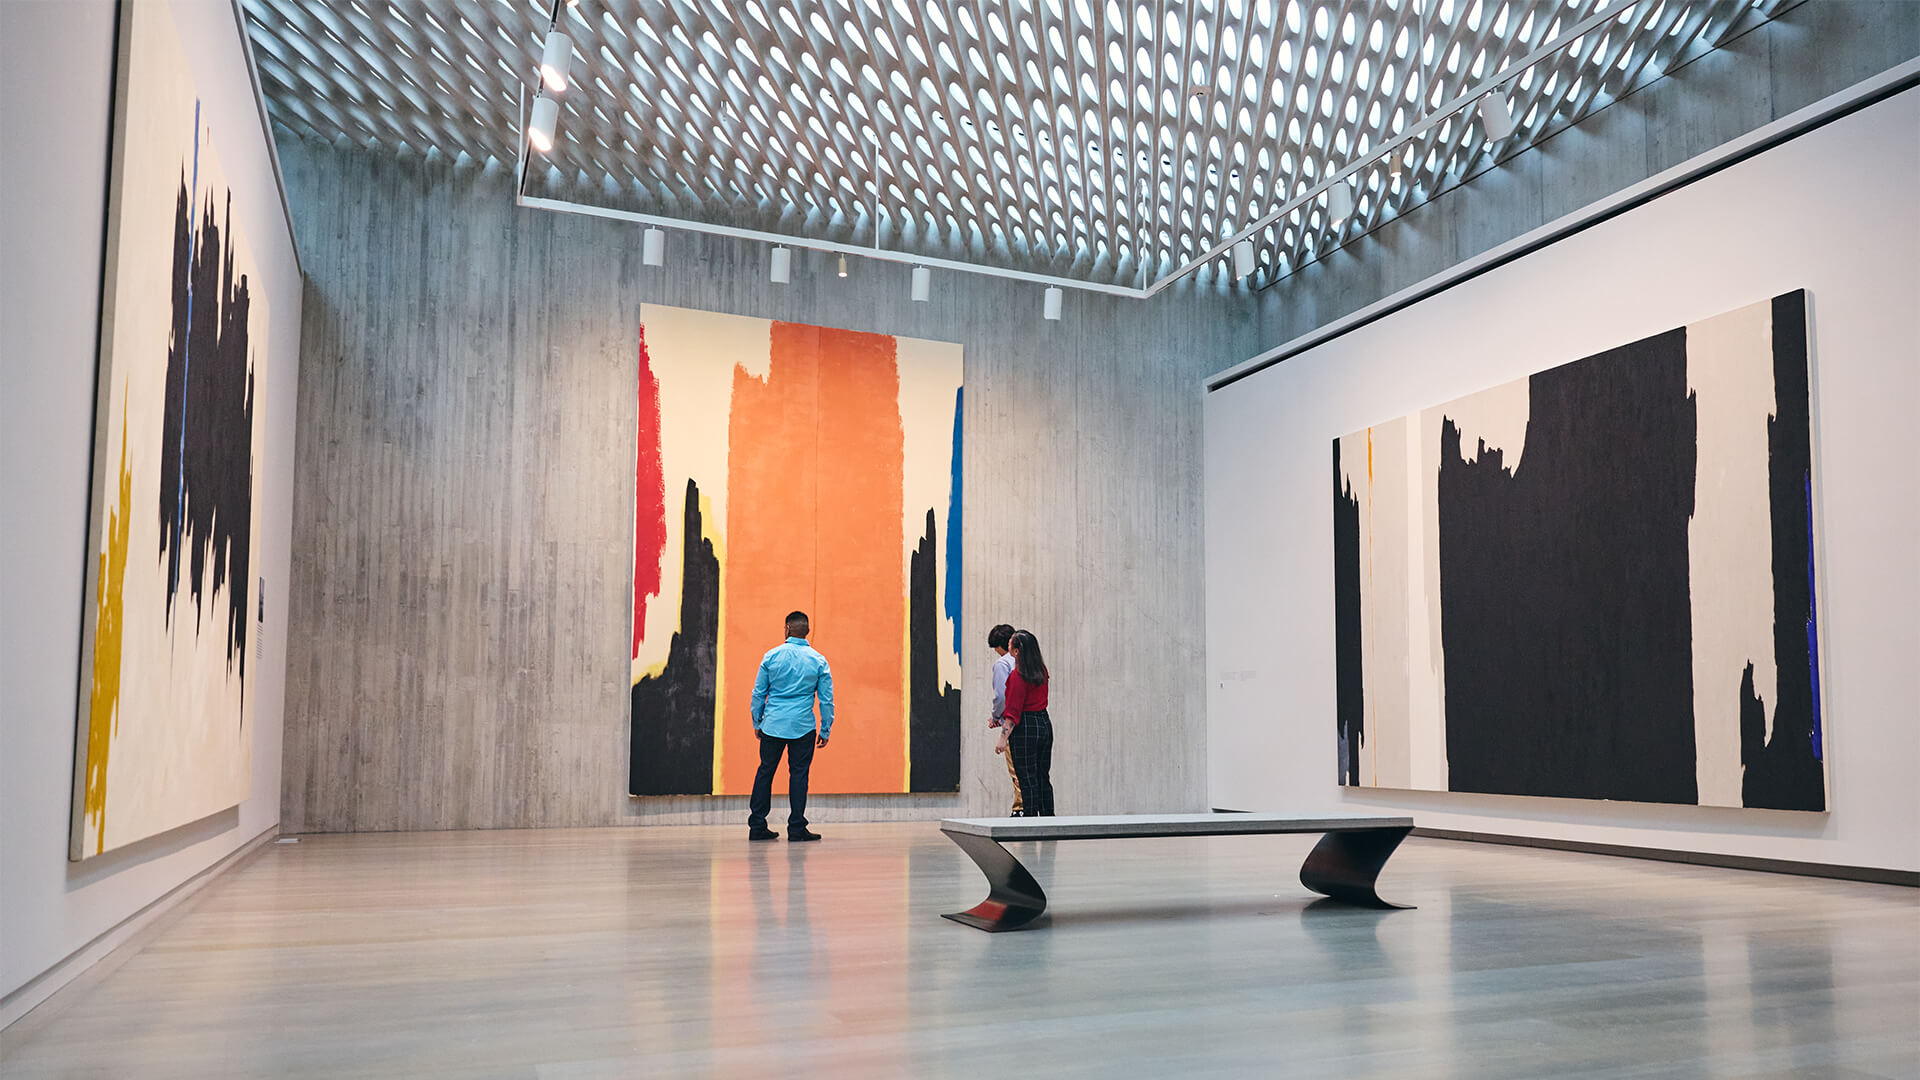 A family stands in a gallery with large, abstract paintings